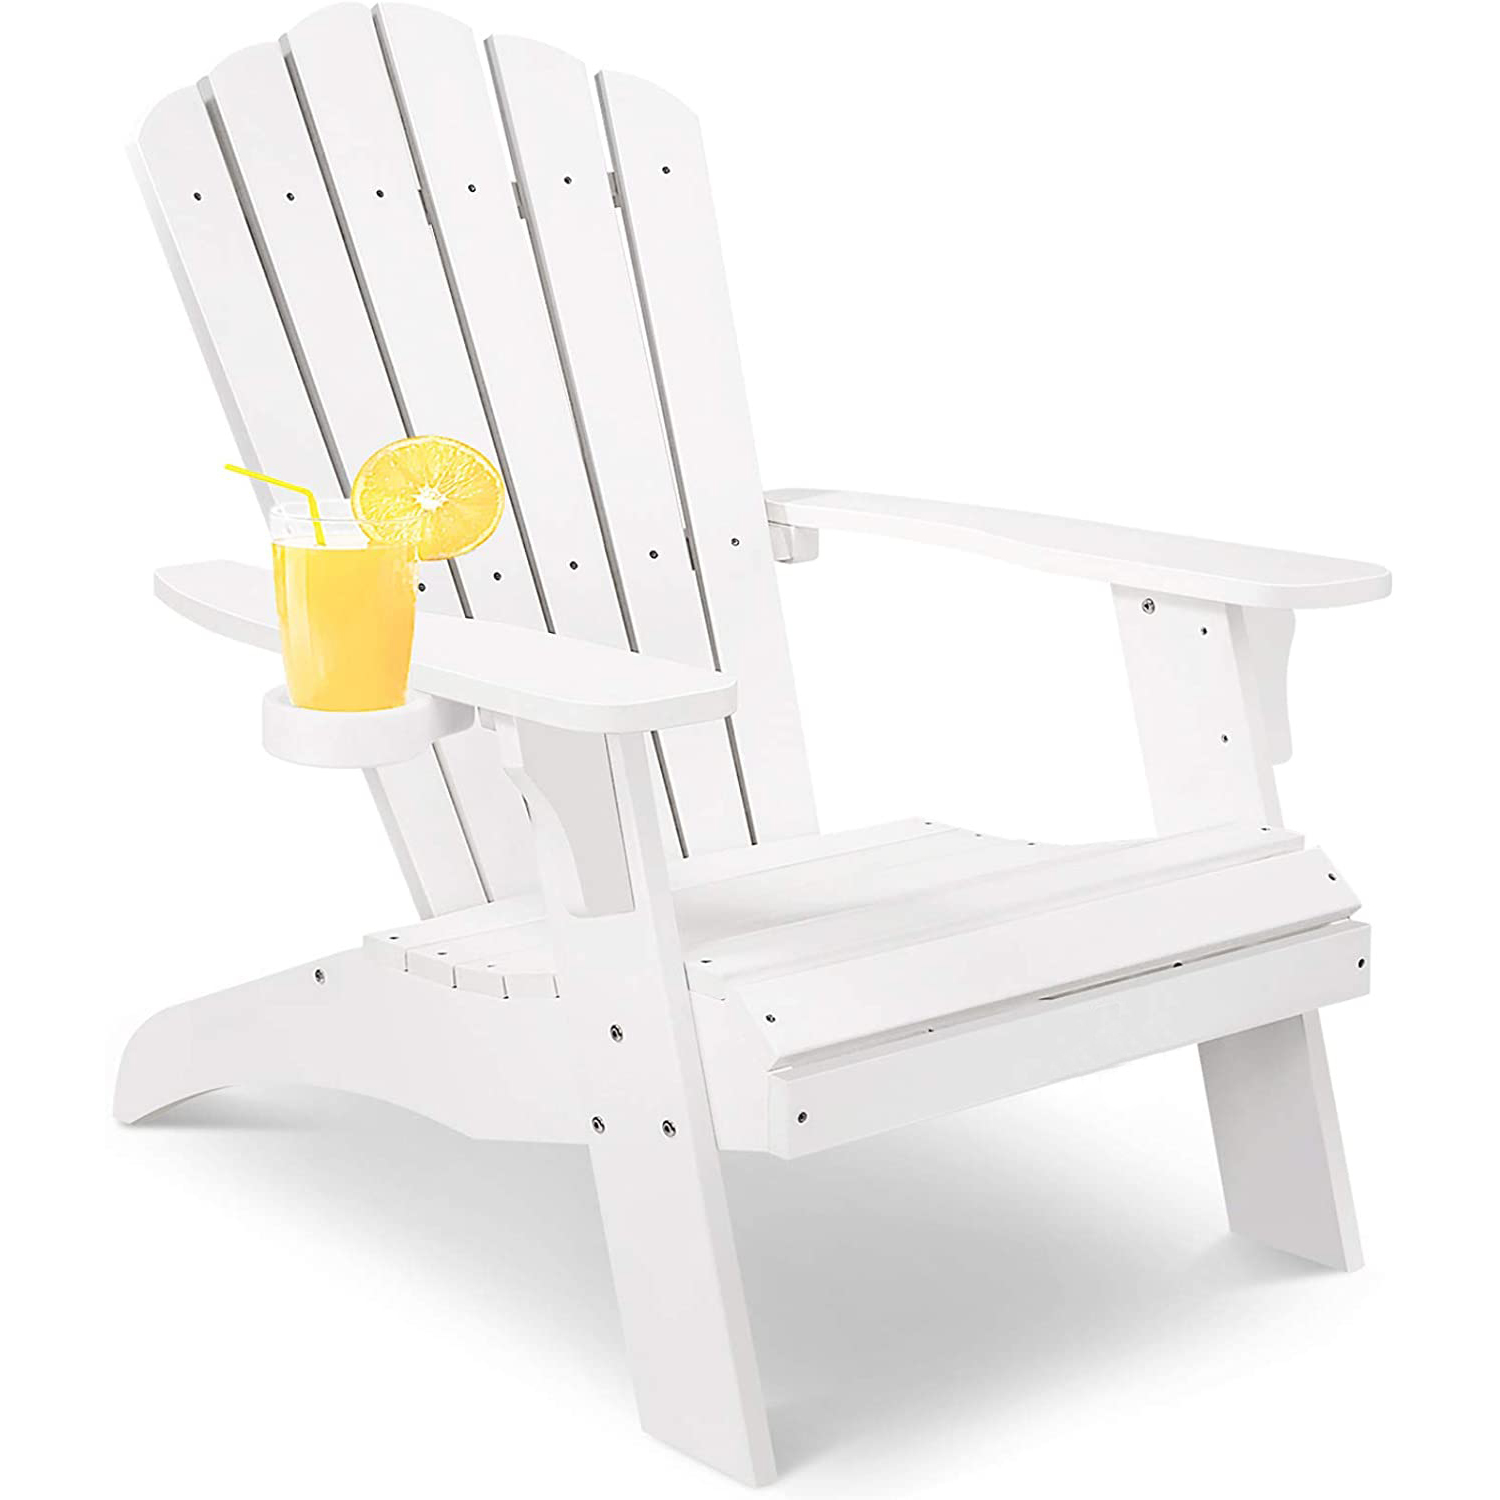 SUGIFT Adirondack Chair Backyard Outdoor Furniture,Patio Seating with Cup Holder,Fade-Resistant Plastic Wood for Lawn Patio Deck Garden Porch Lawn Furniture Chair,White - image 1 of 8